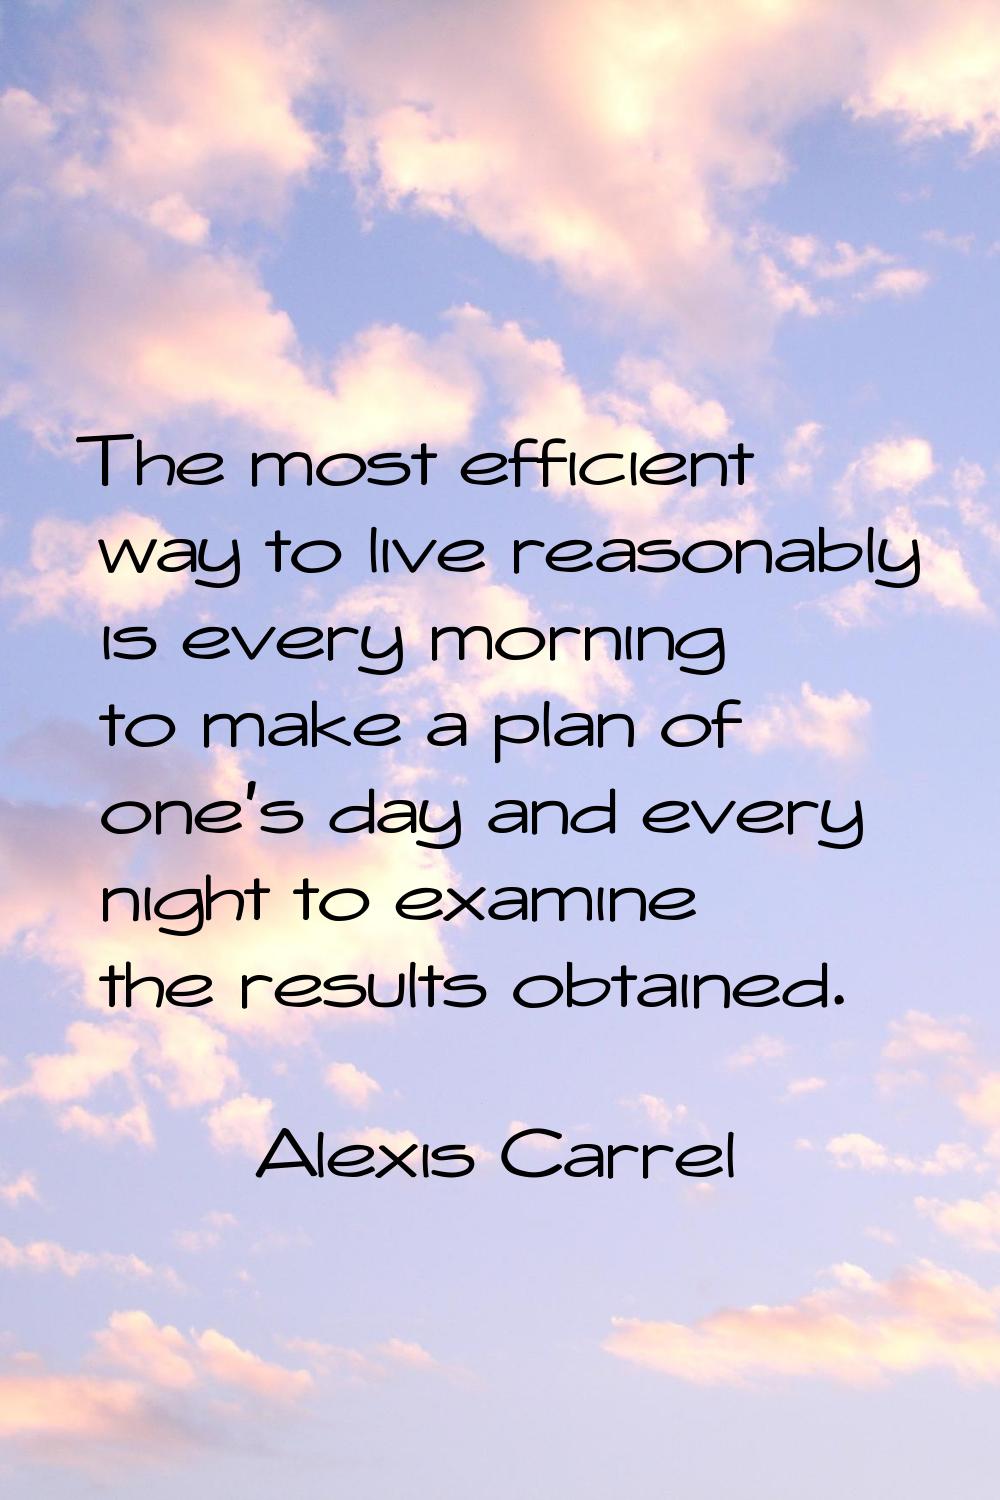 The most efficient way to live reasonably is every morning to make a plan of one's day and every ni